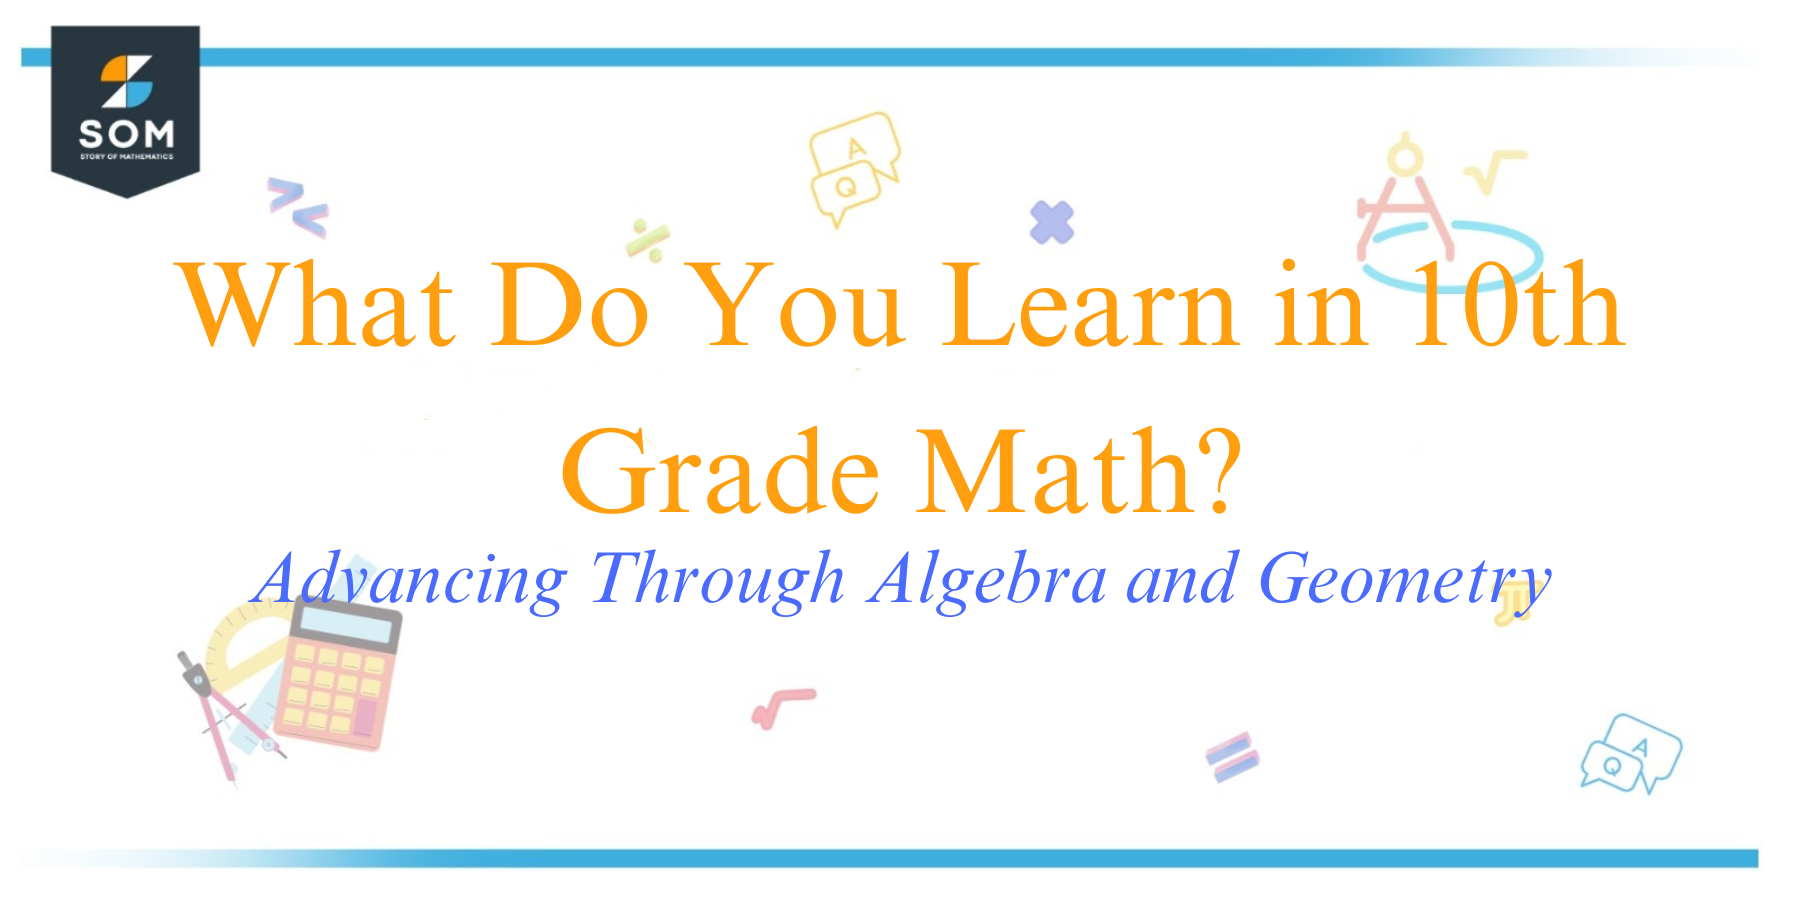 What Do You Learn in 10th Grade Math Advancing Through Algebra and Geometry